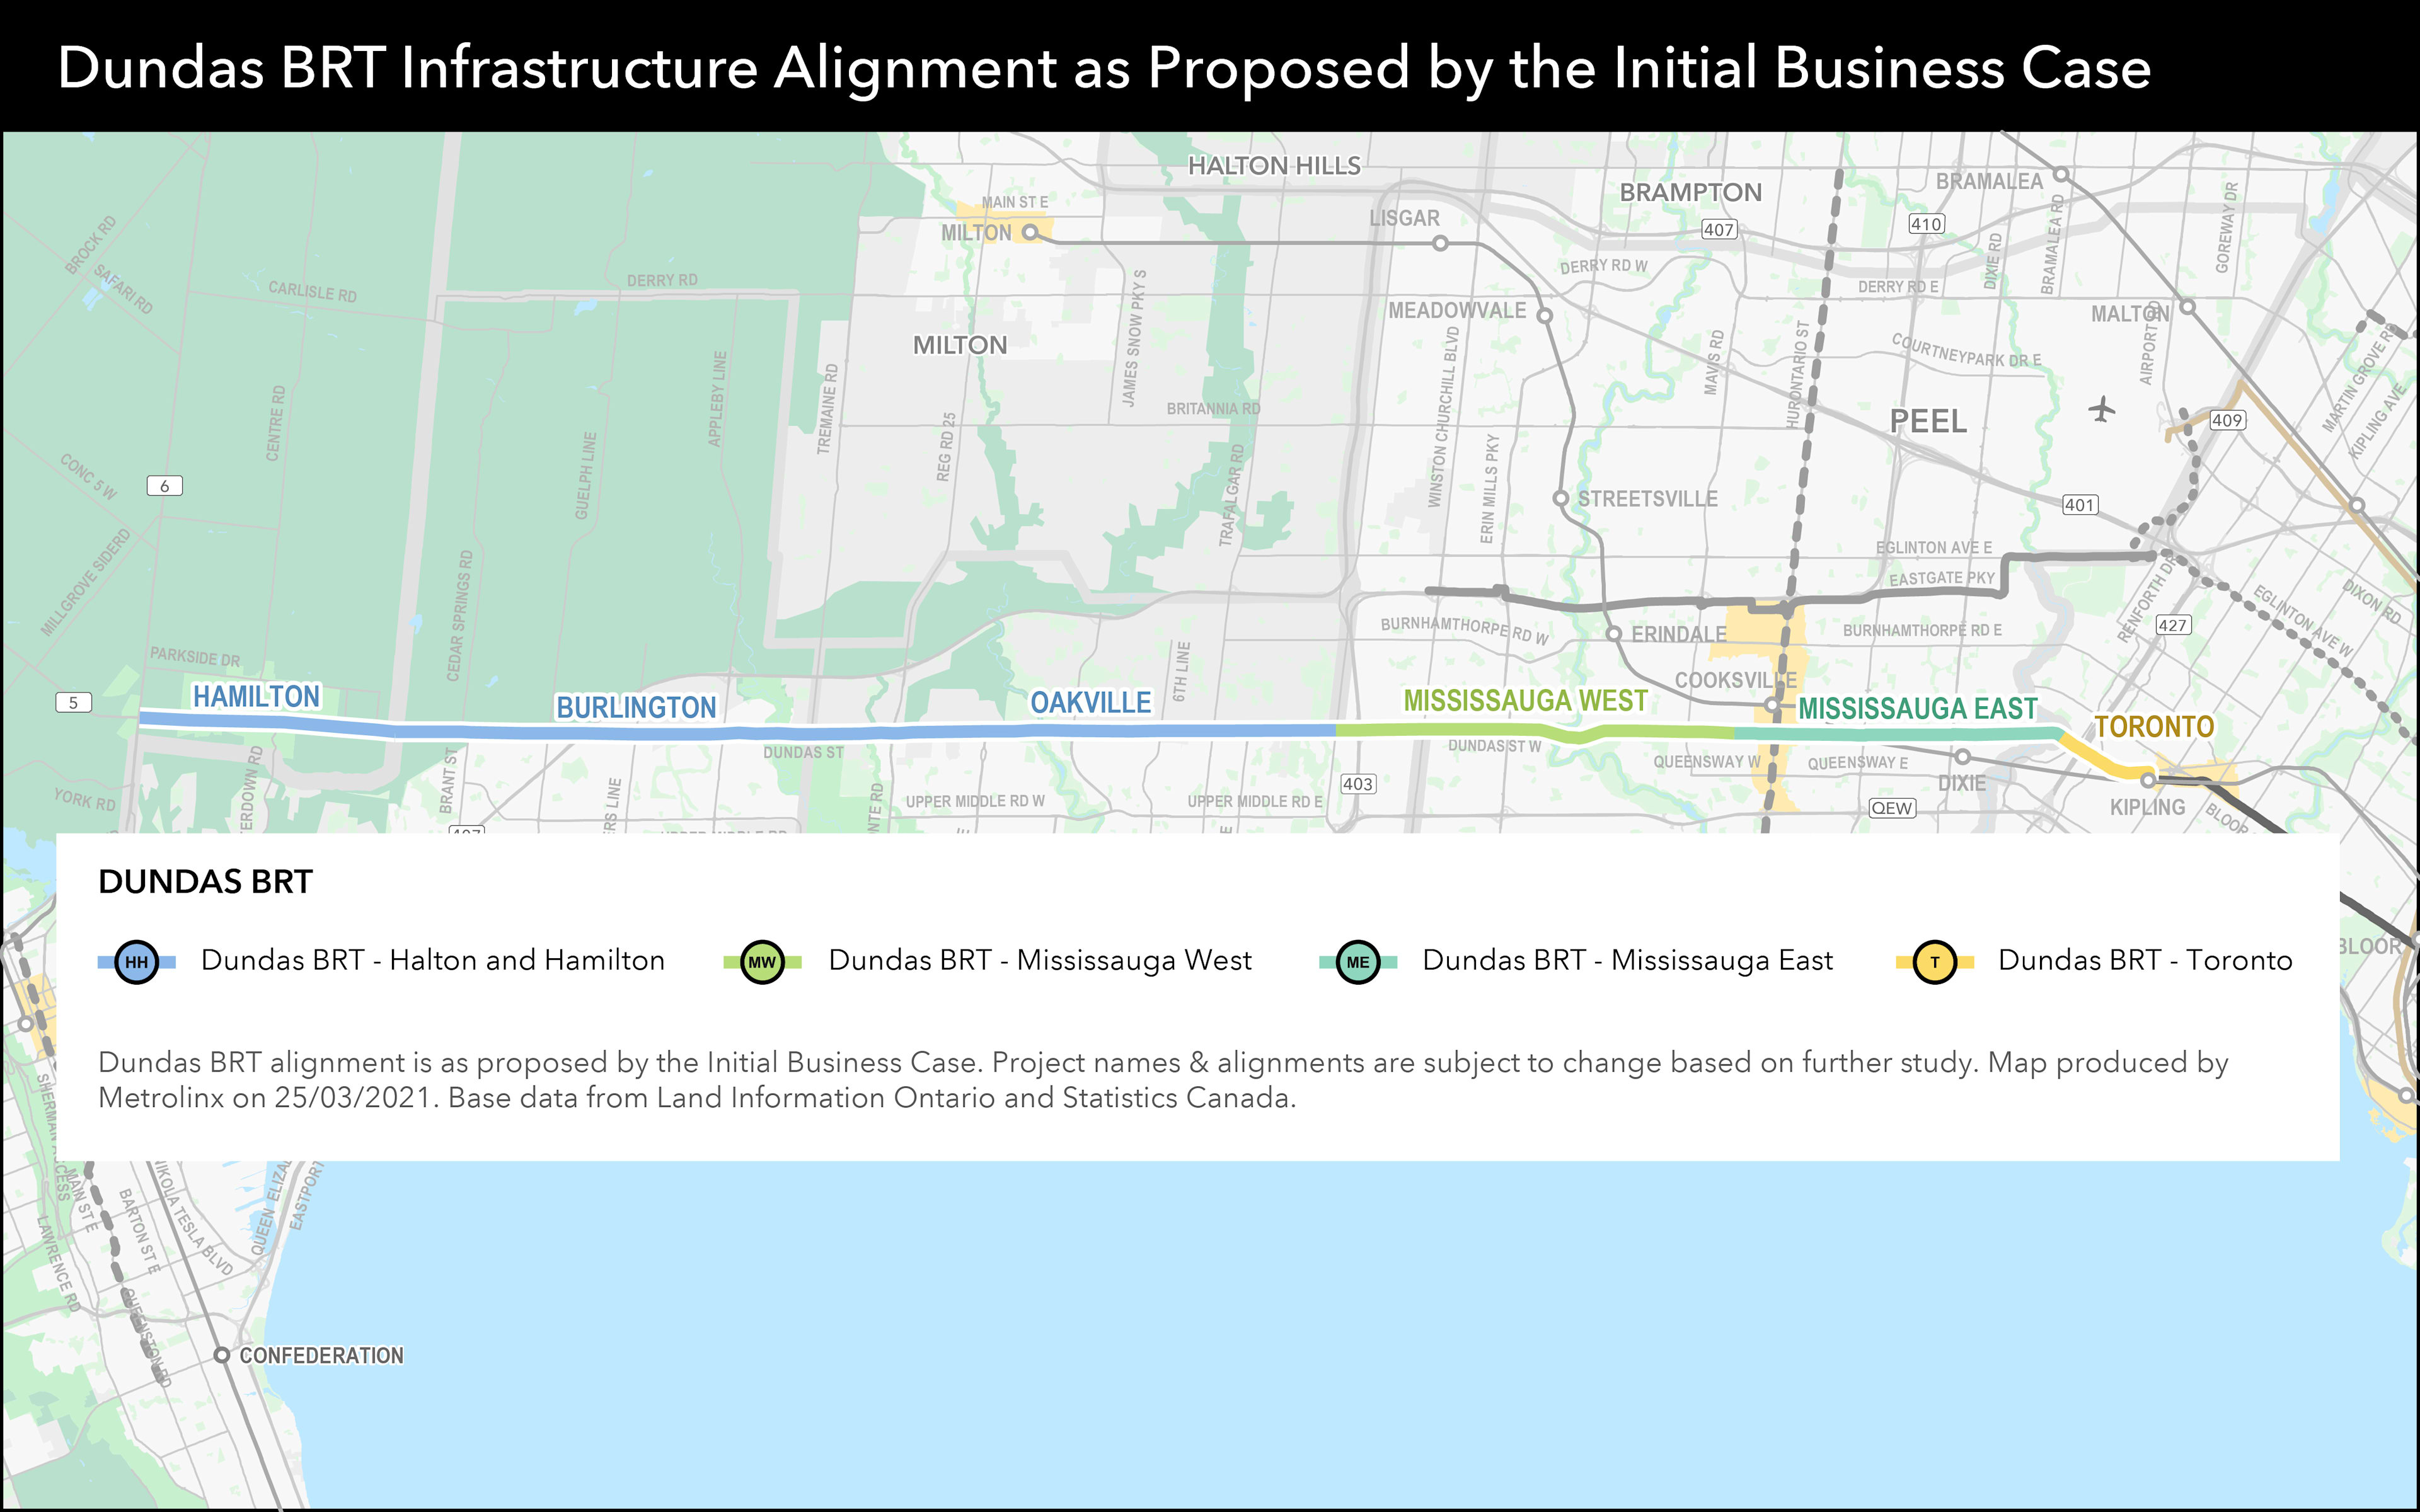 Dundas BRT Infrastructure Alignment as Proposed by IBC